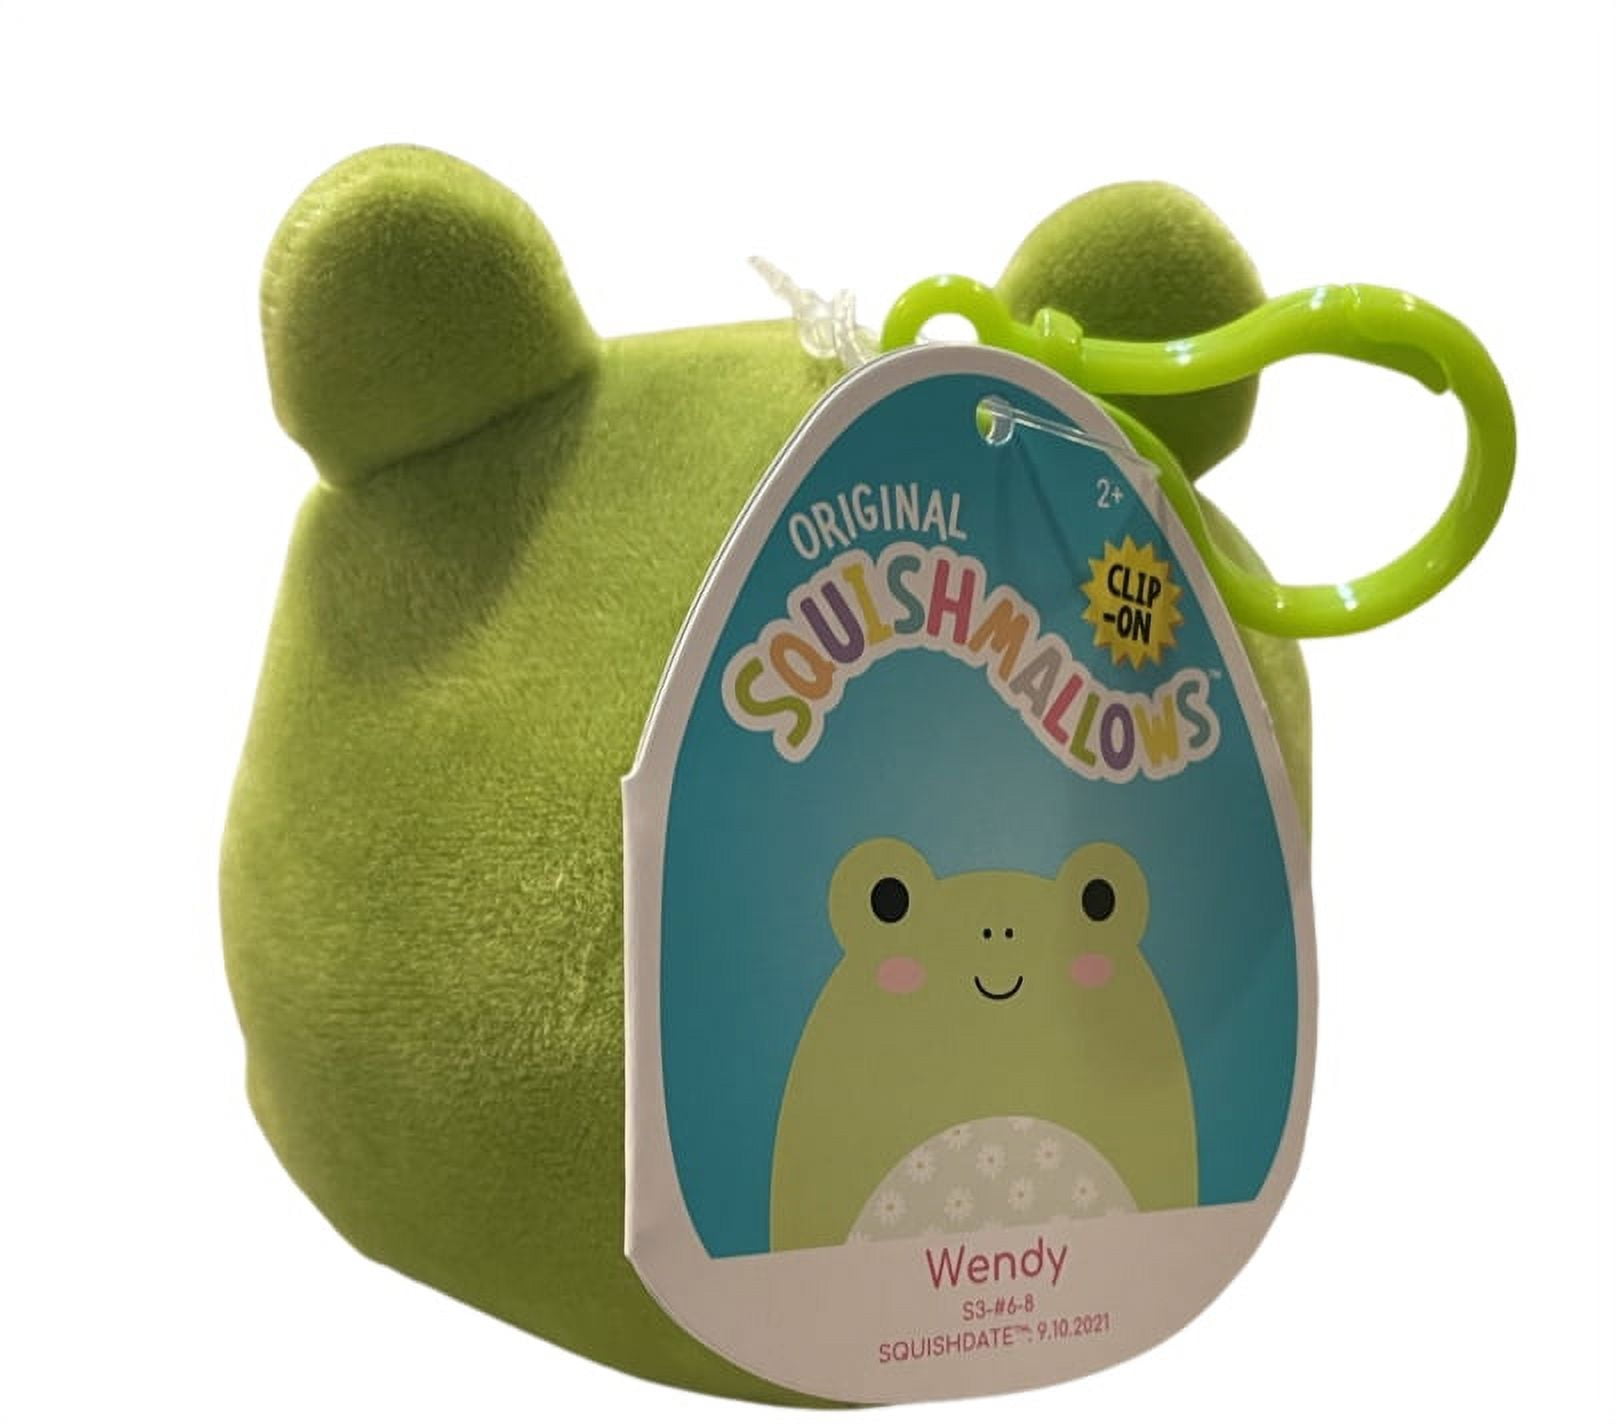 Squishmallow Wendy the Frog Cake #cake #fondant #squishmallows #squish